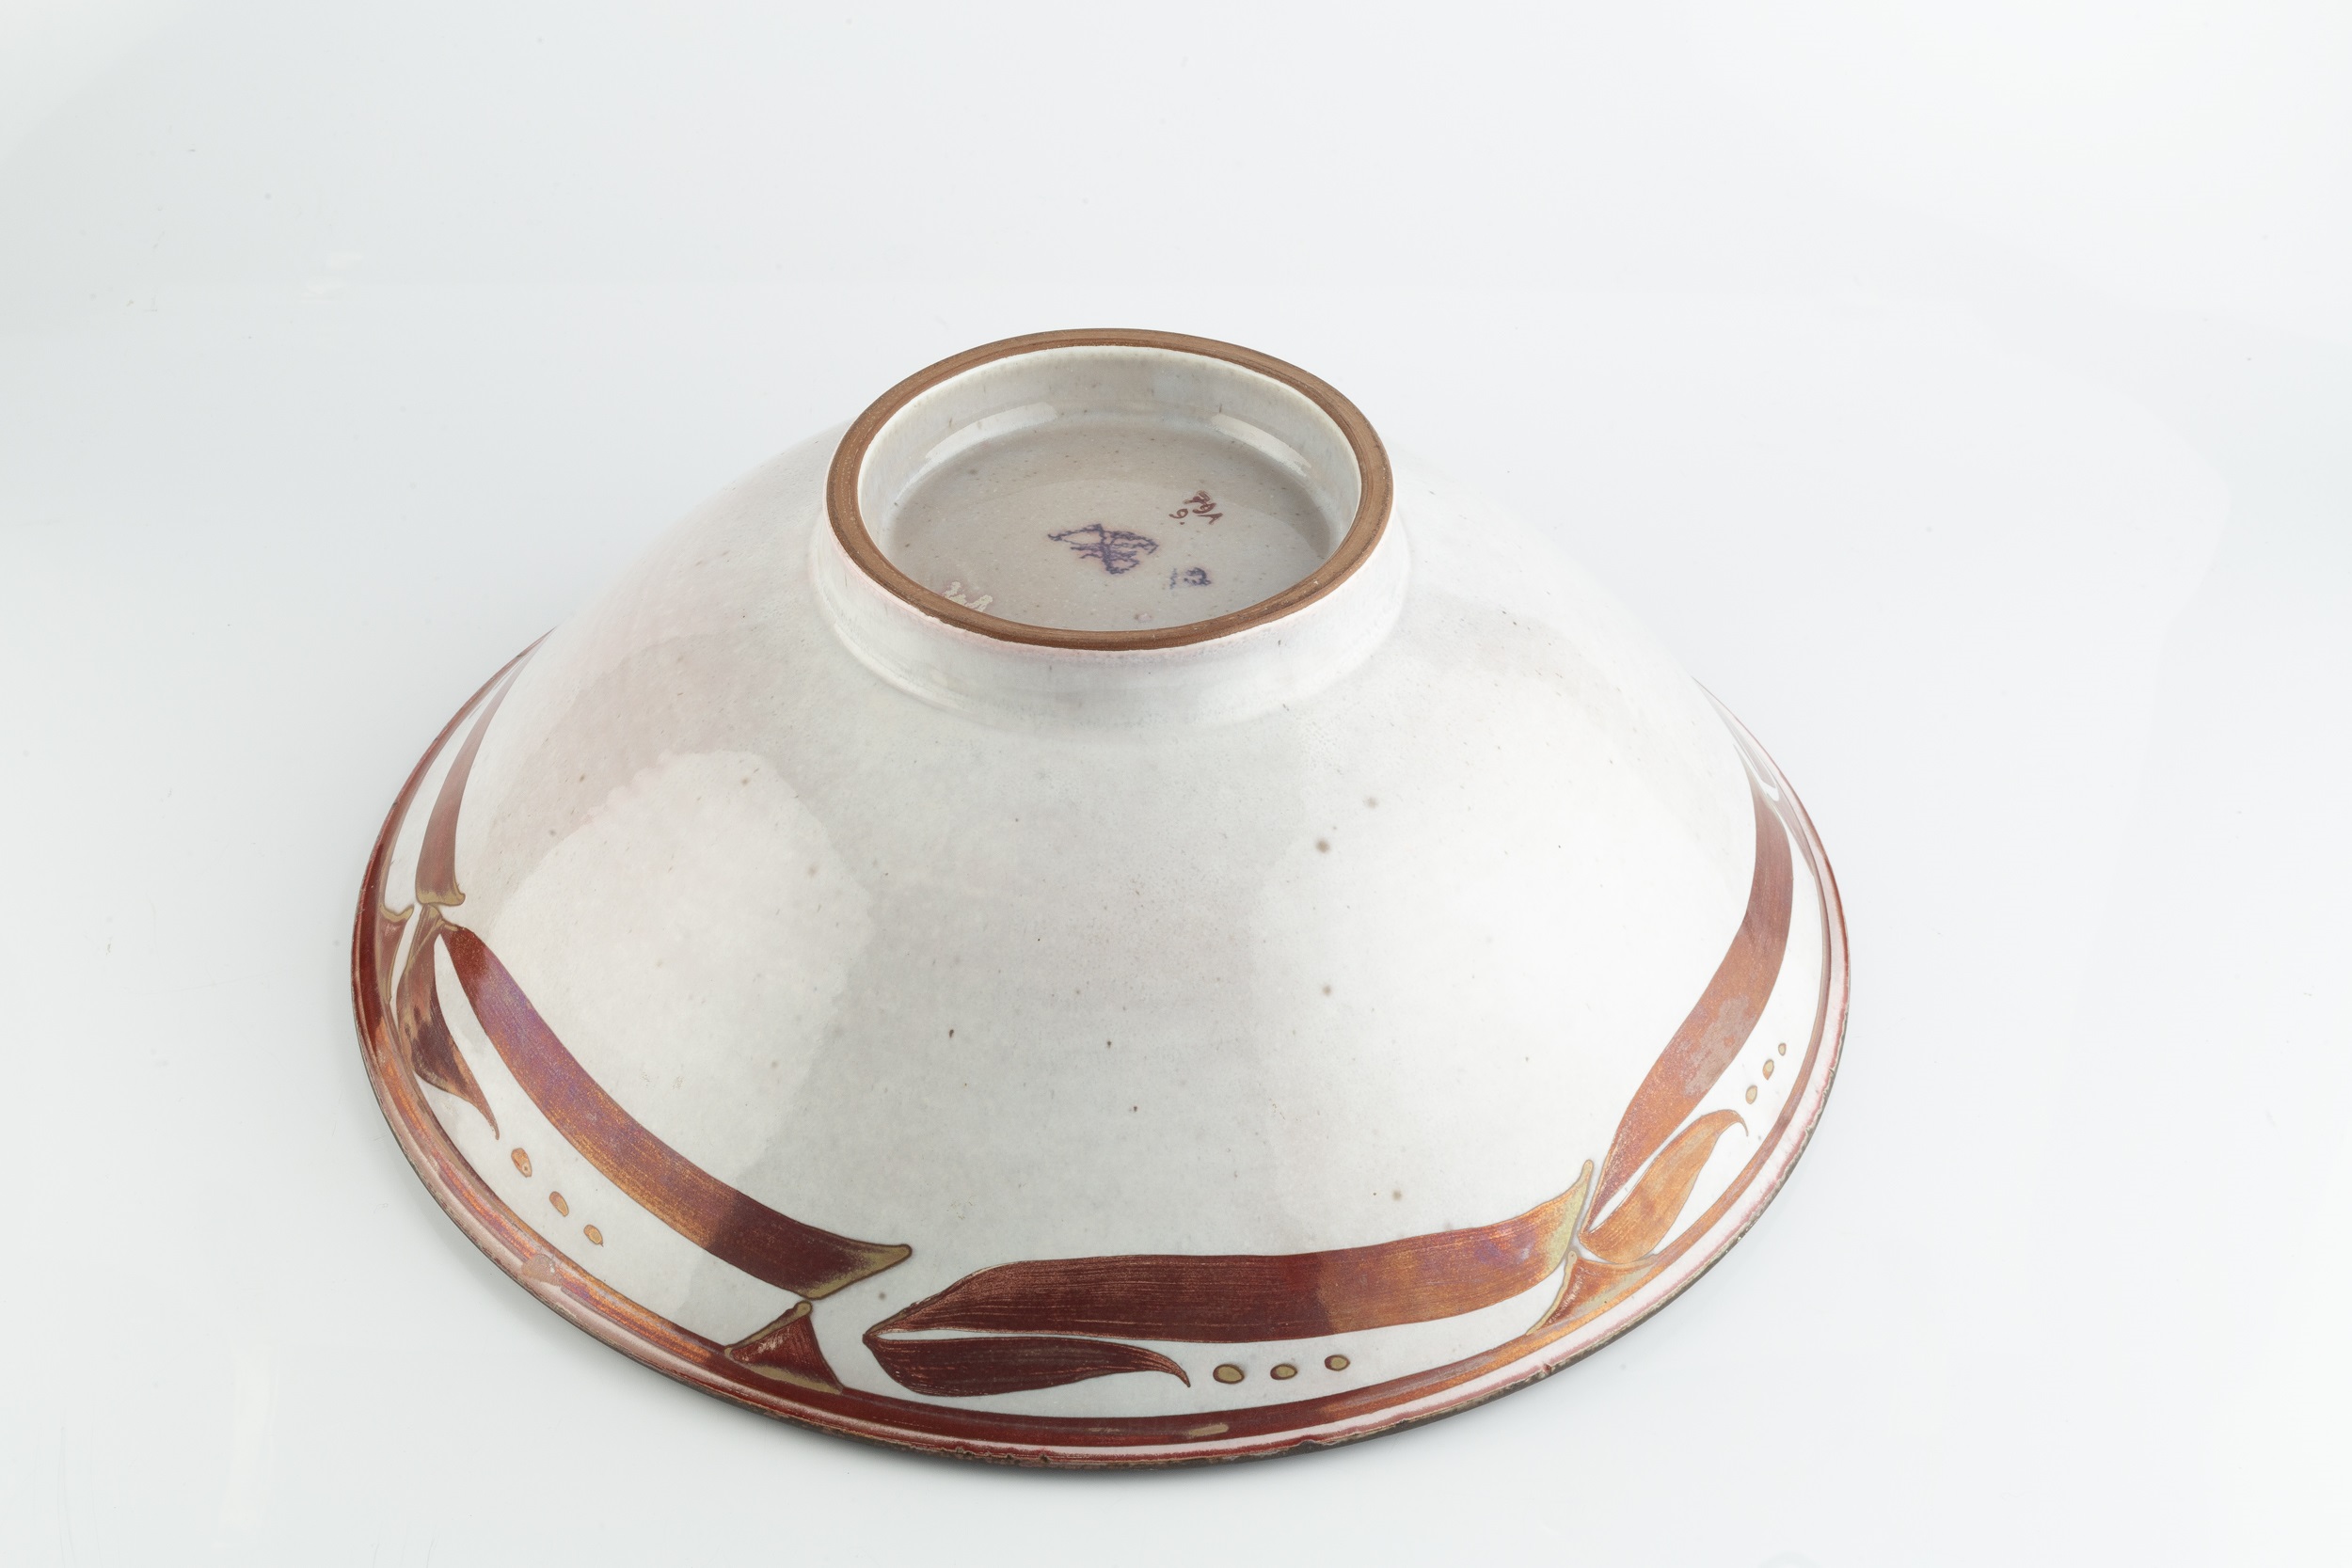 Alan Caiger-Smith (1930-2020) at Aldermaston Pottery Large footed bowl decorated in ruby and gold - Image 4 of 4